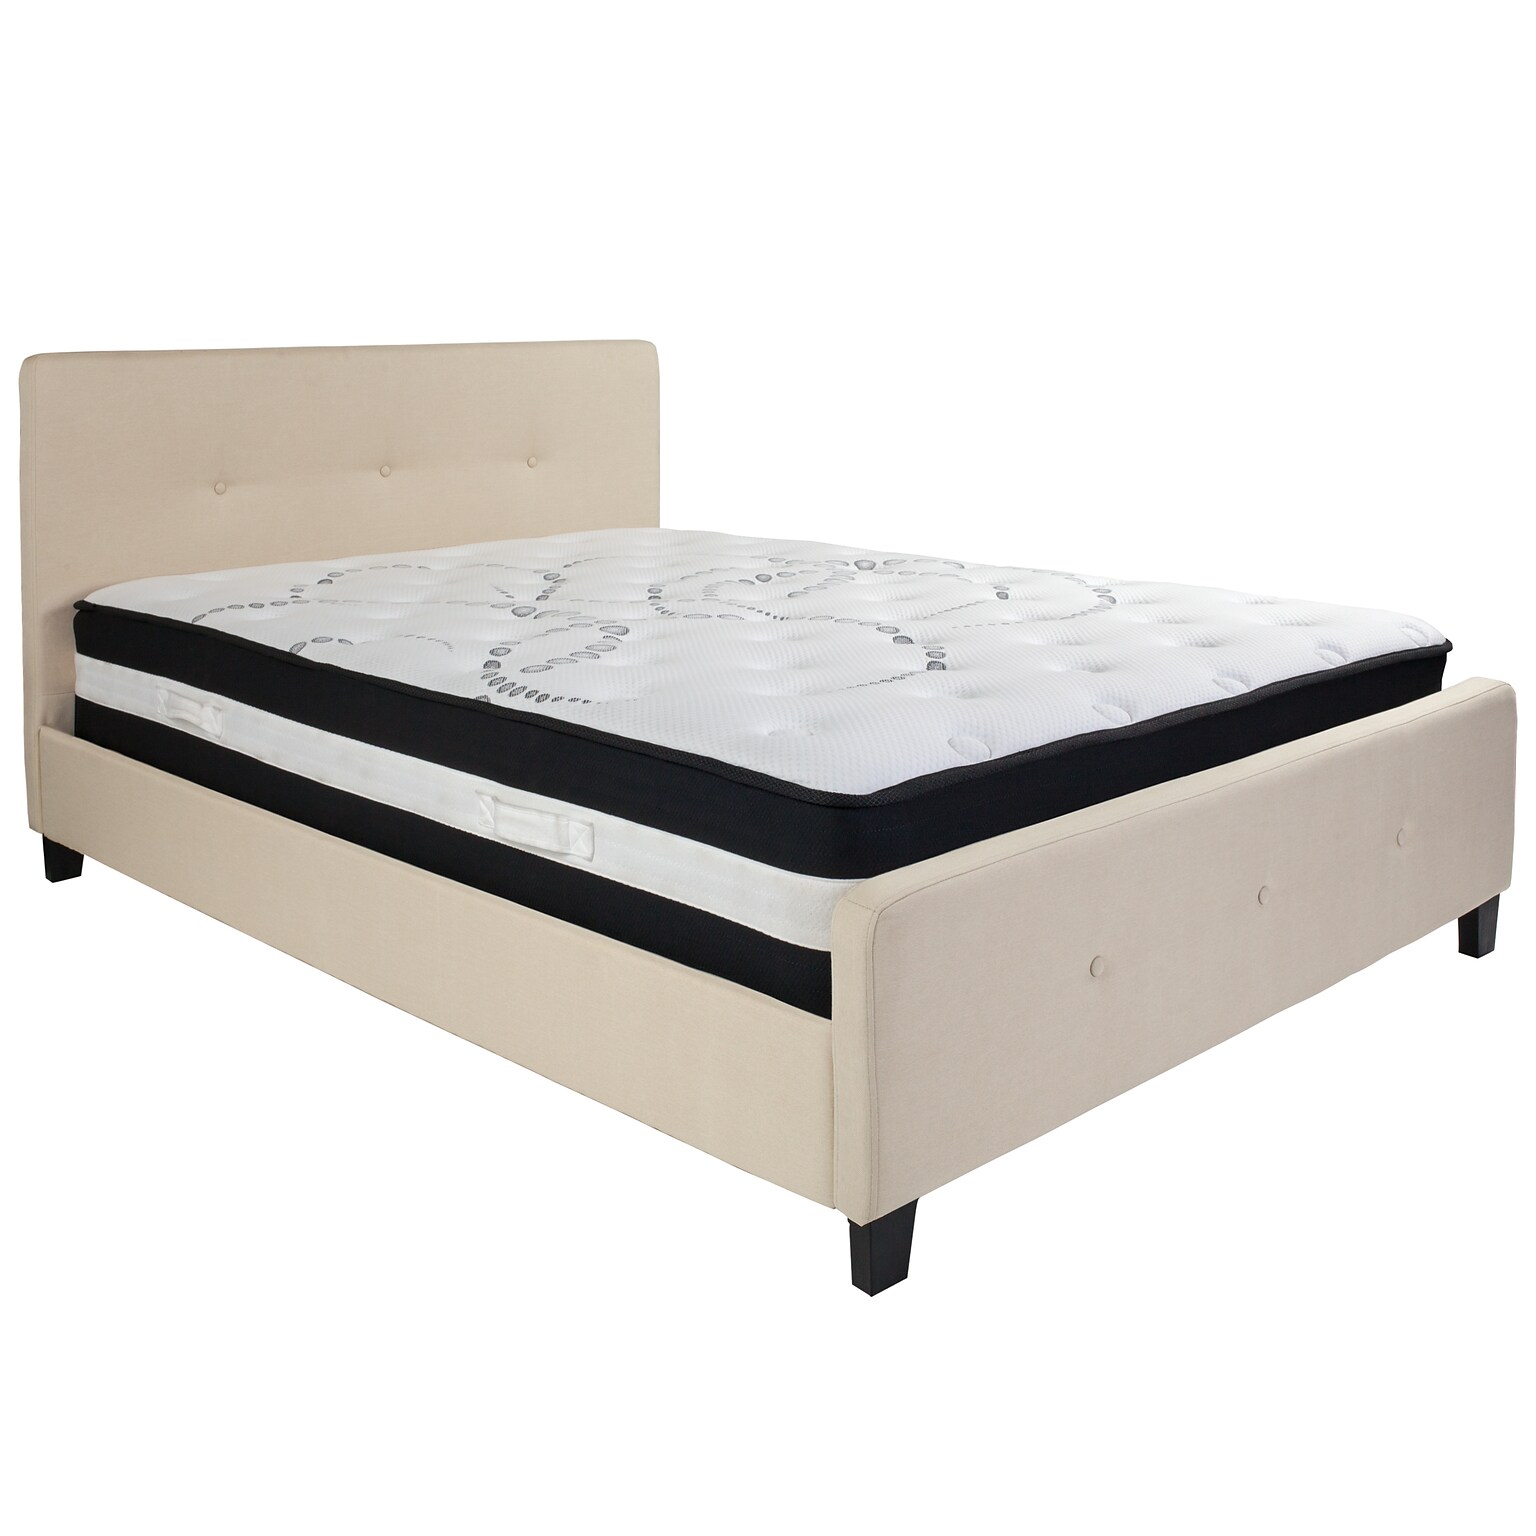 Flash Furniture Tribeca Tufted Upholstered Platform Bed in Beige Fabric with Pocket Spring Mattress, Queen (HGBM19)